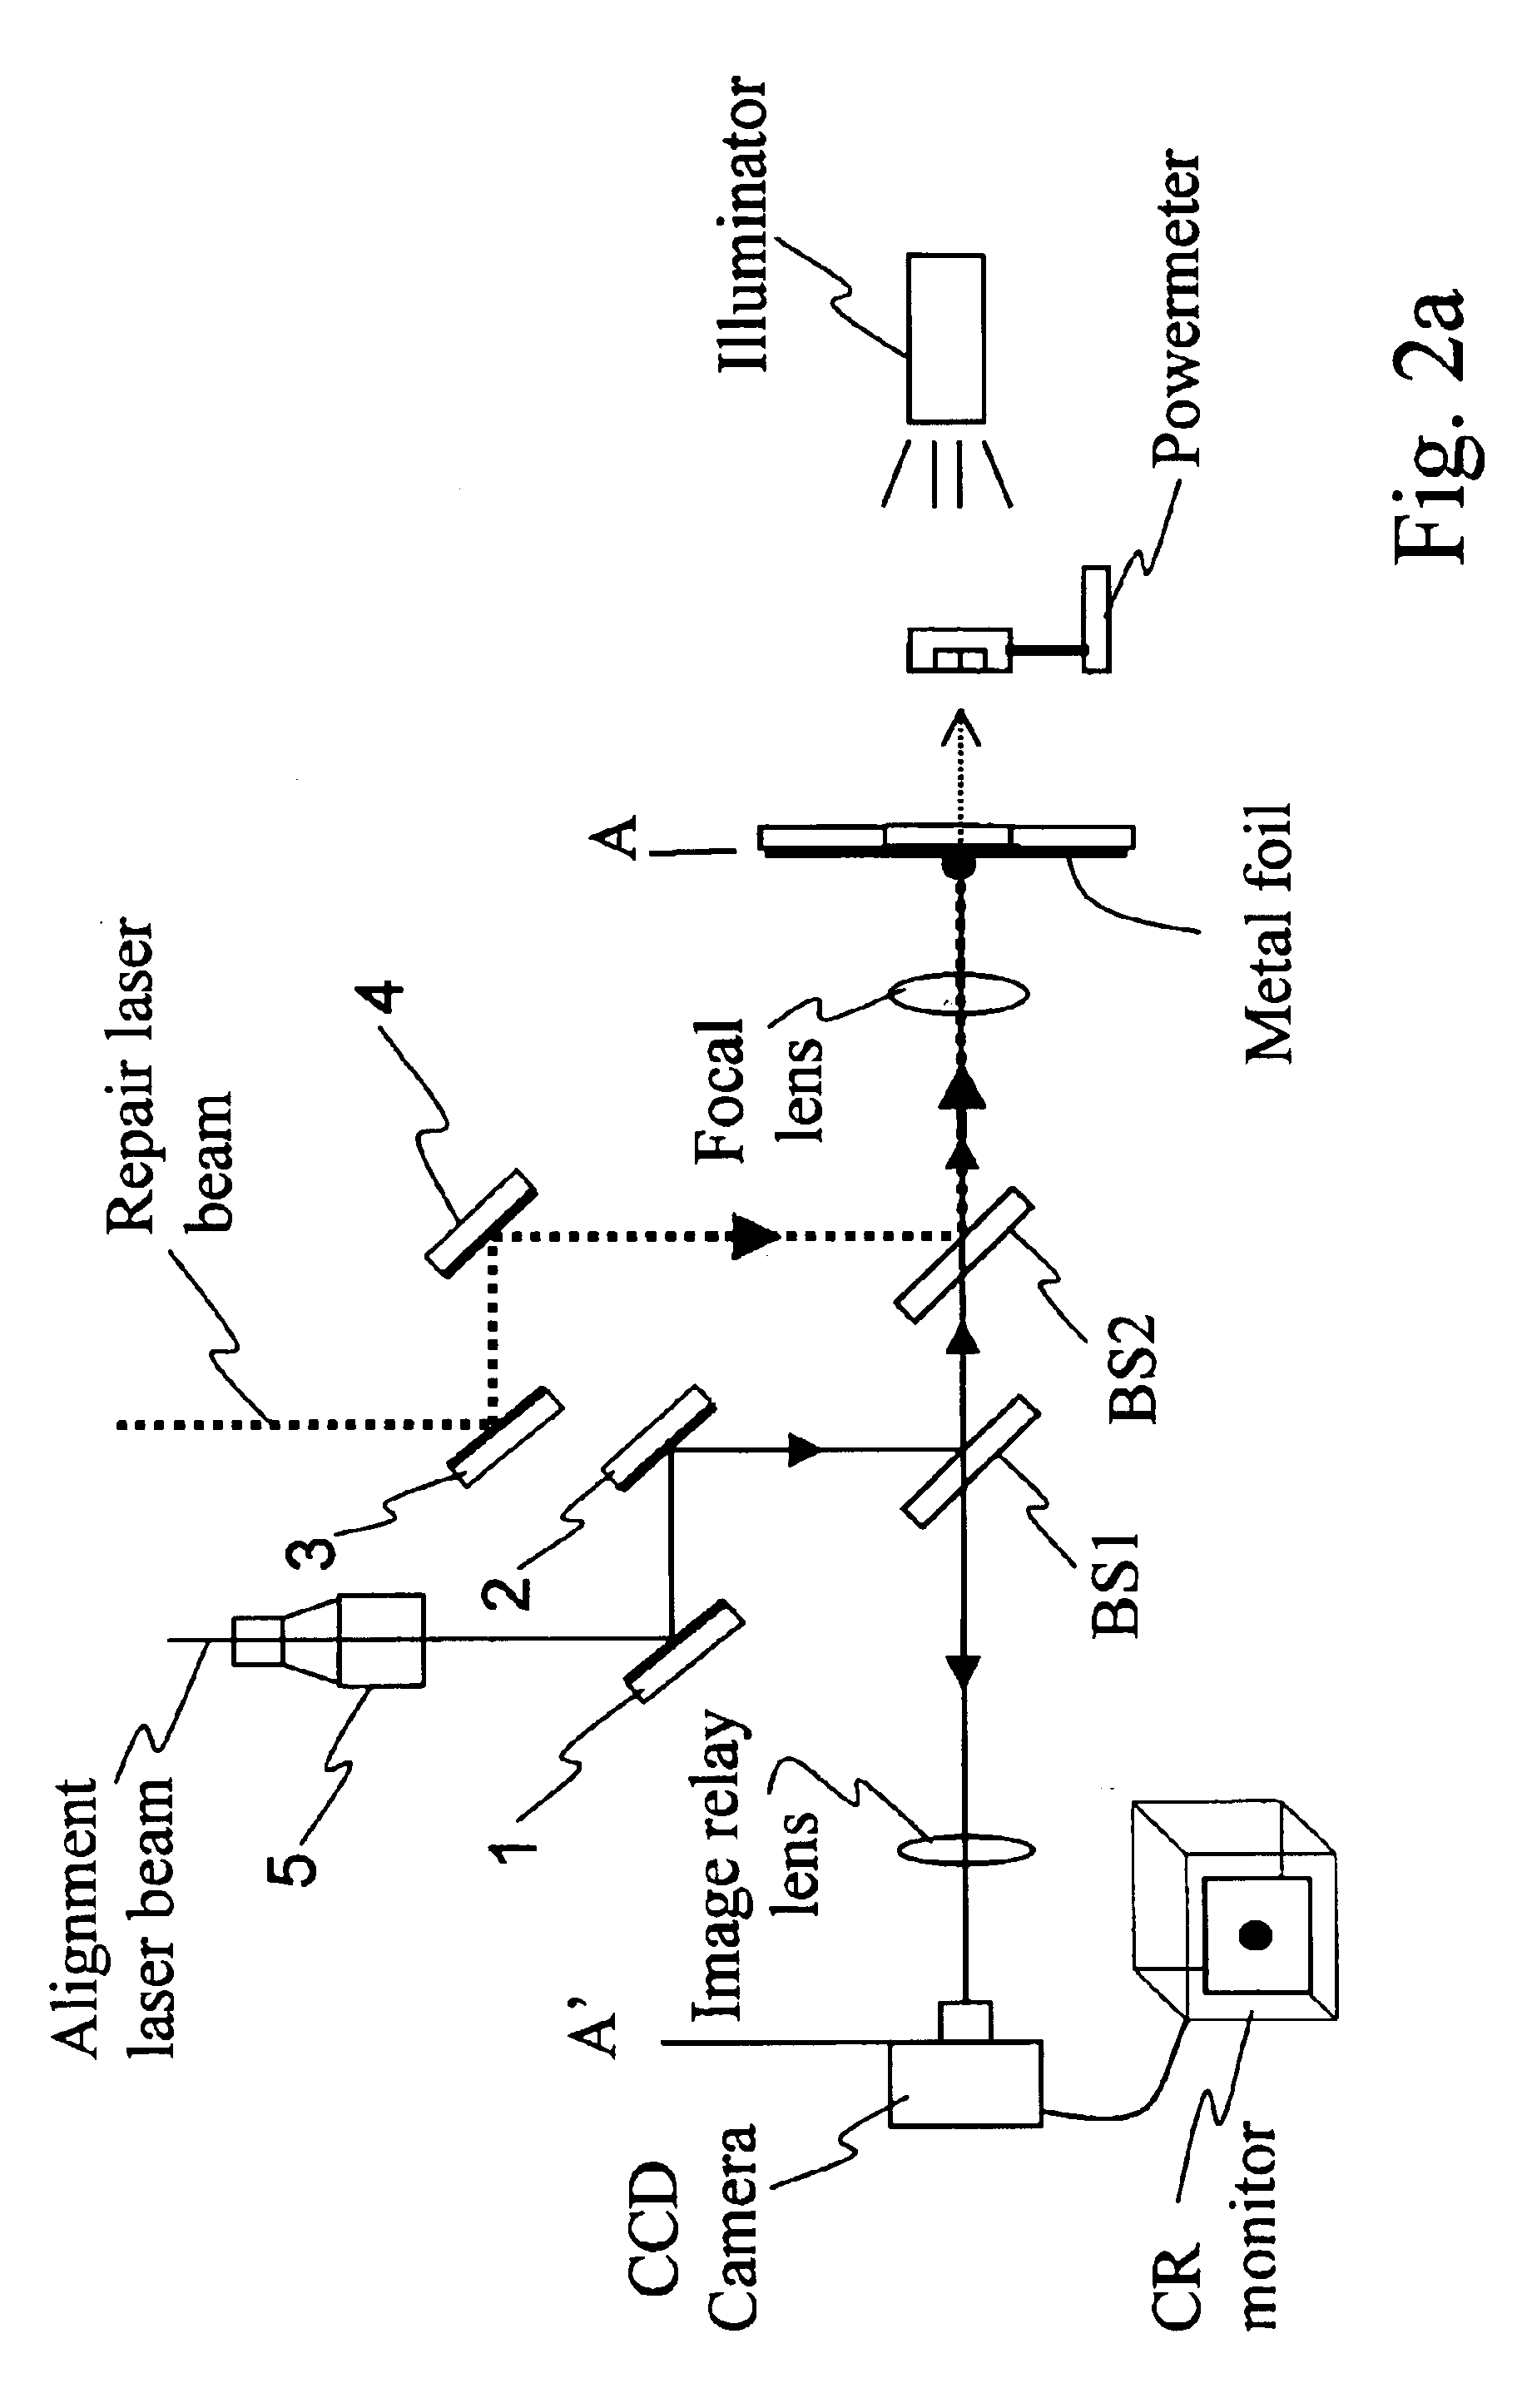 Method and apparatus for repair of defects in materials with short laser pulses